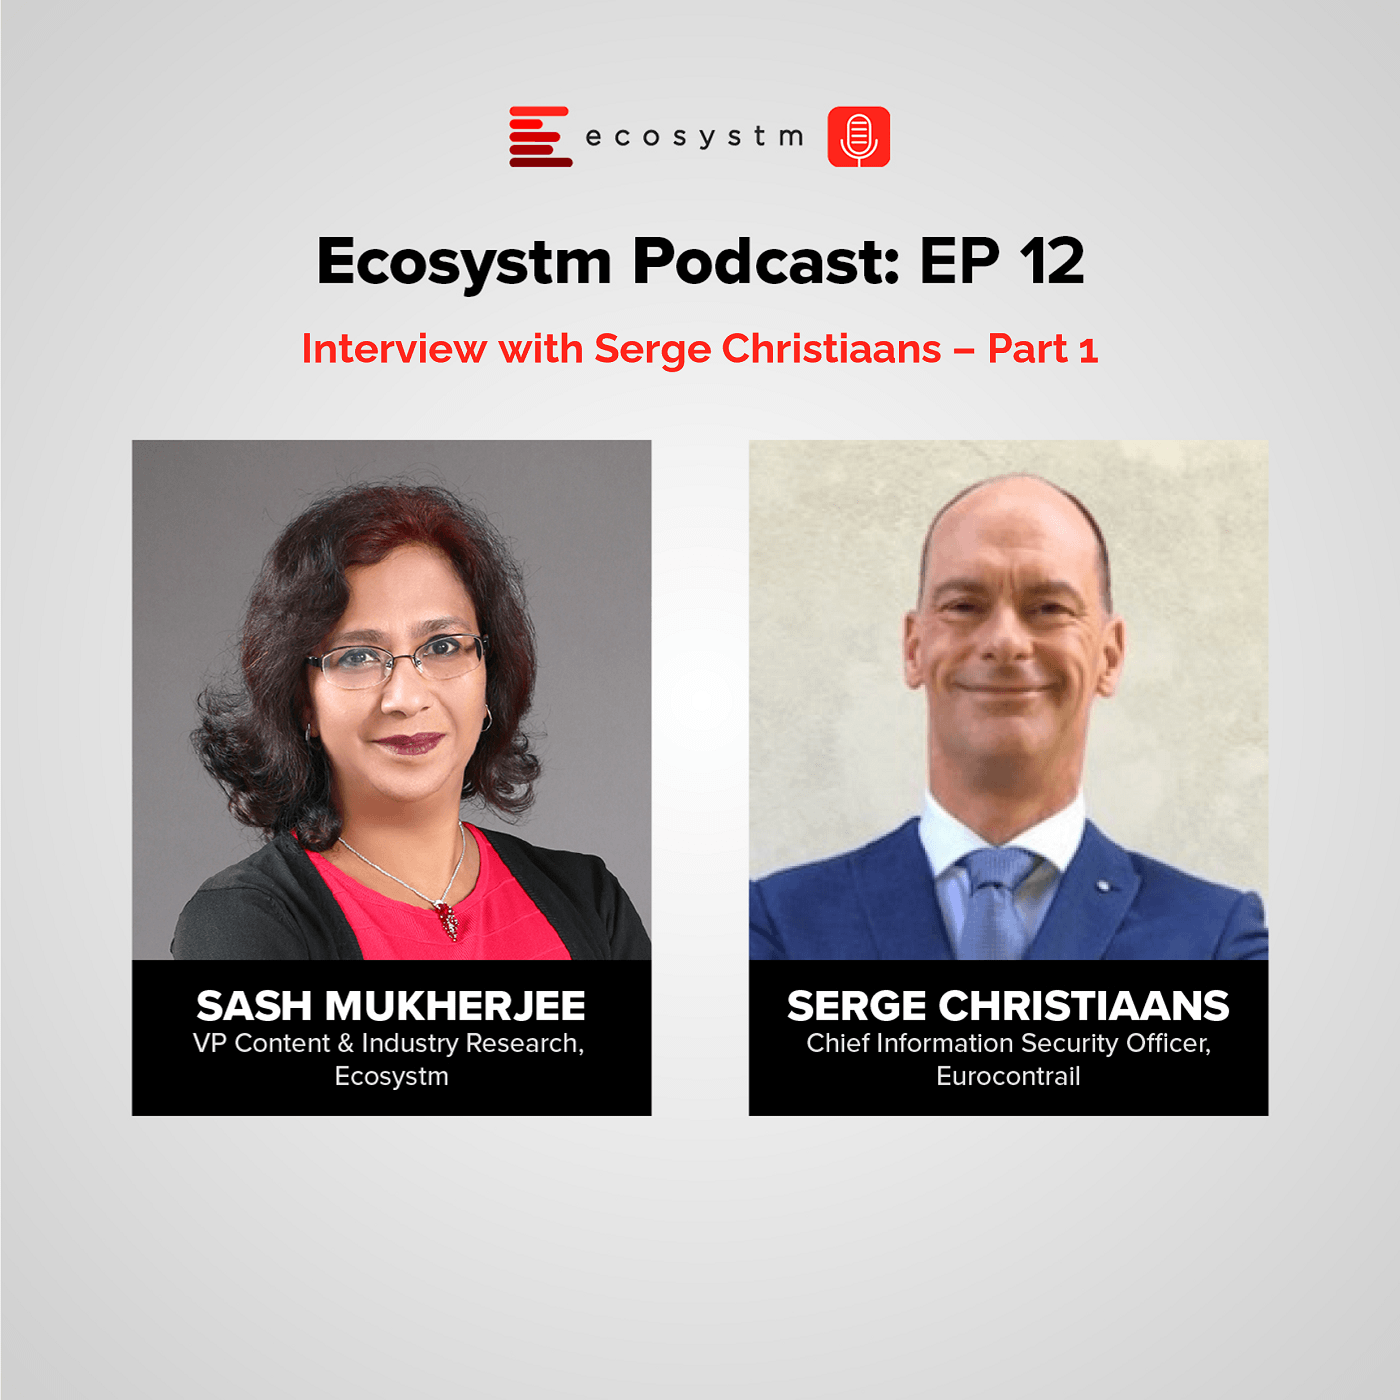 Ecosystm Podcast Episode 12 - Interview with Serge Christiaans – Part 1